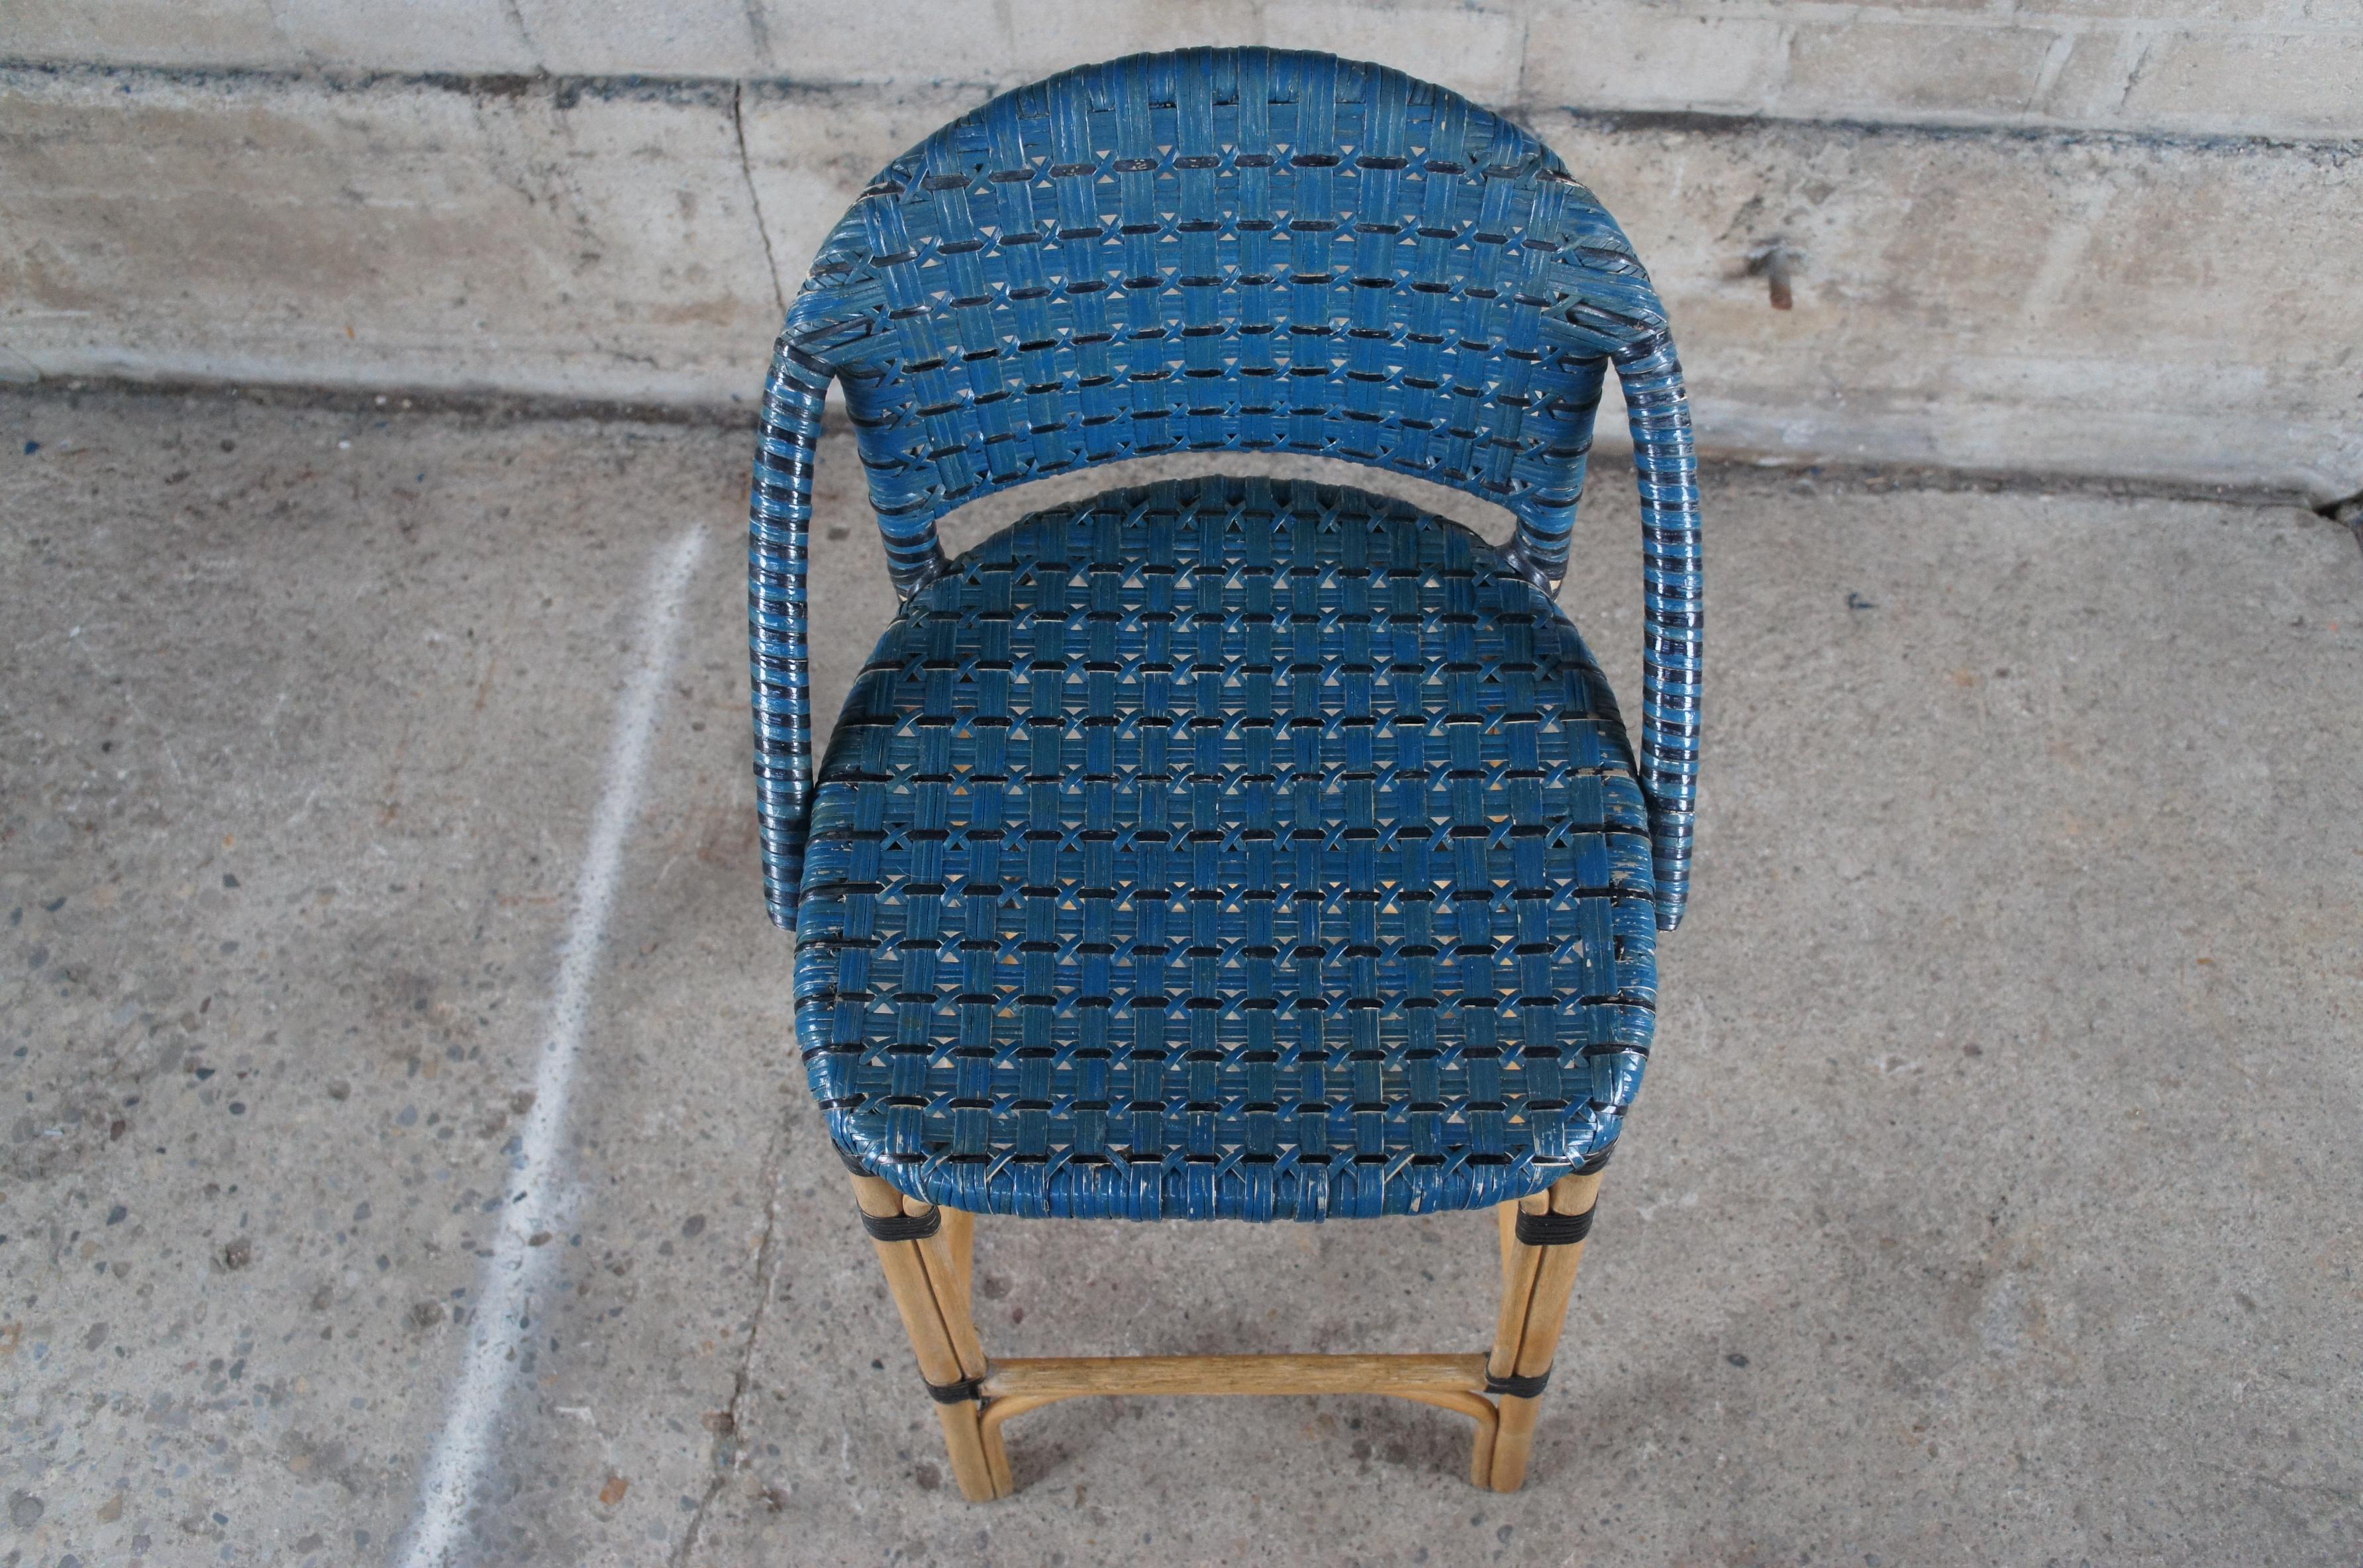 Bamboo 3 Vtg French Café Bistro Blue Woven Rattan Bentwood Counter Bar Stools Boho Chic